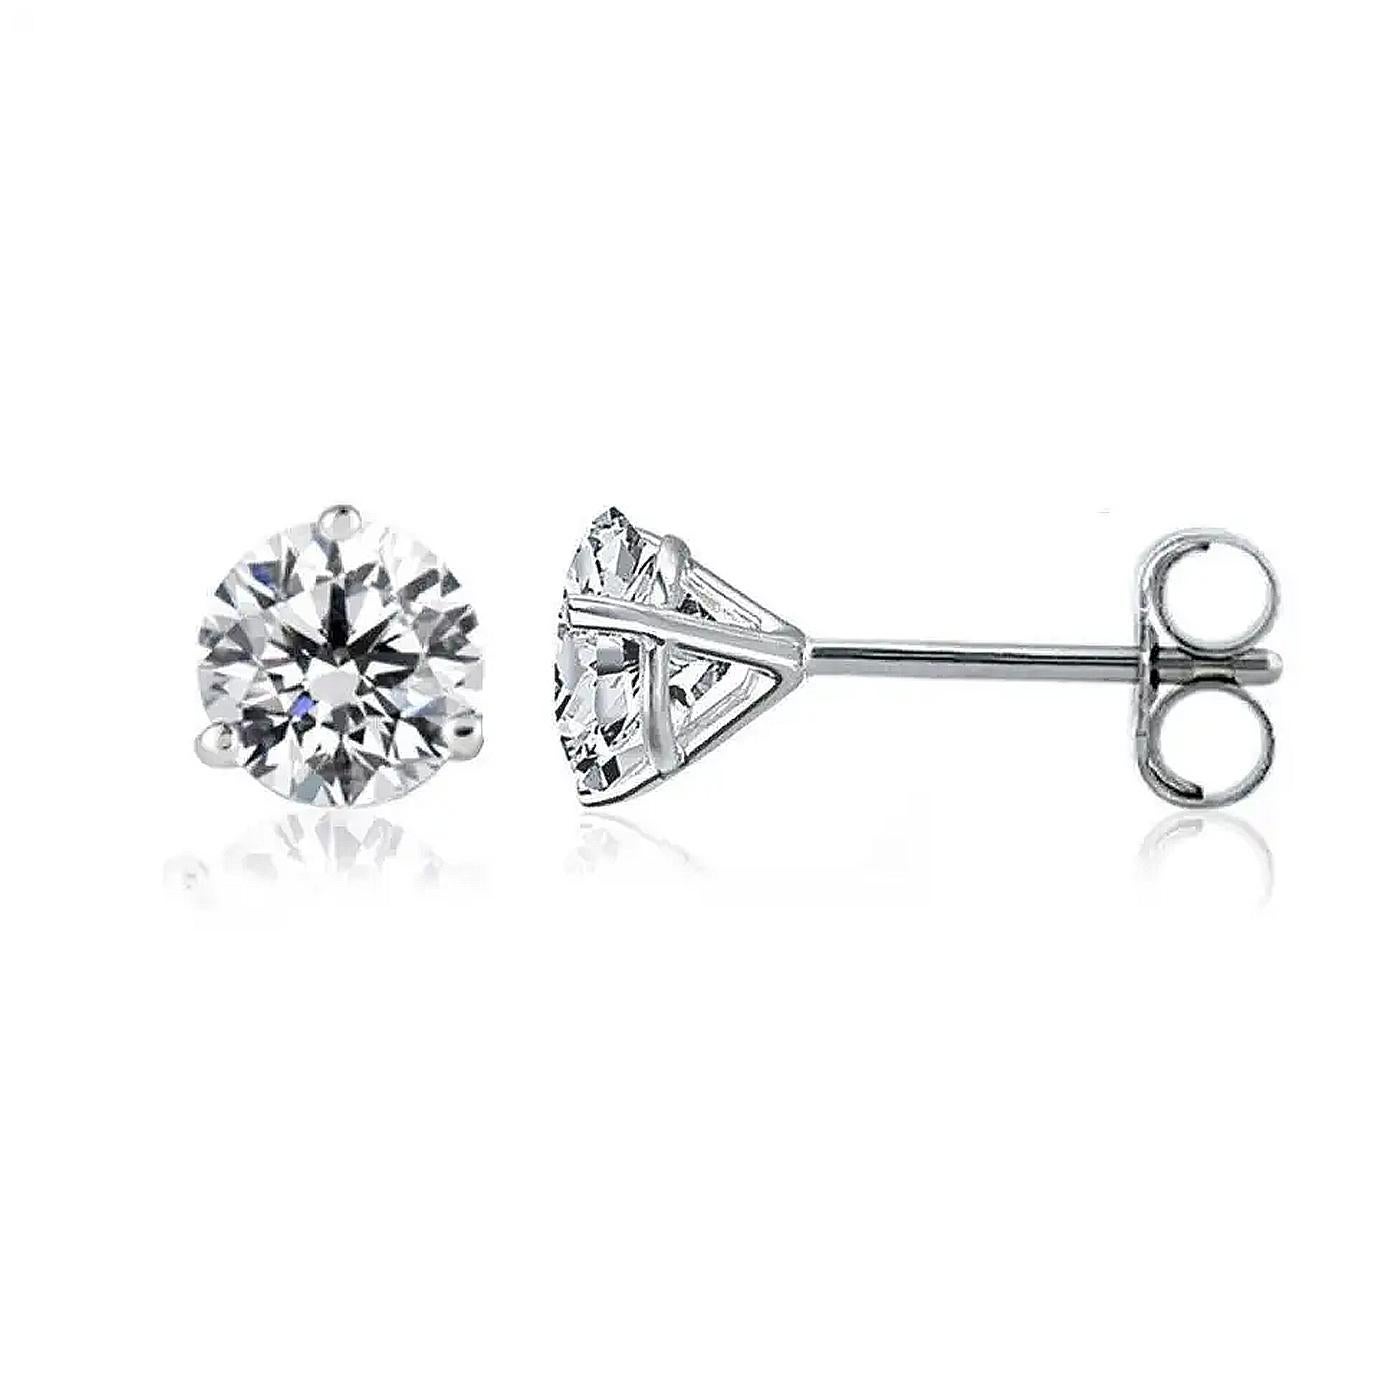 These Four-Prong Martini Style Earrings in Platinum are set with your choice of perfectly matched diamonds.
An attractive alternative to traditional stud earrings, martini settings lend all of their glory to the featured diamond within. The